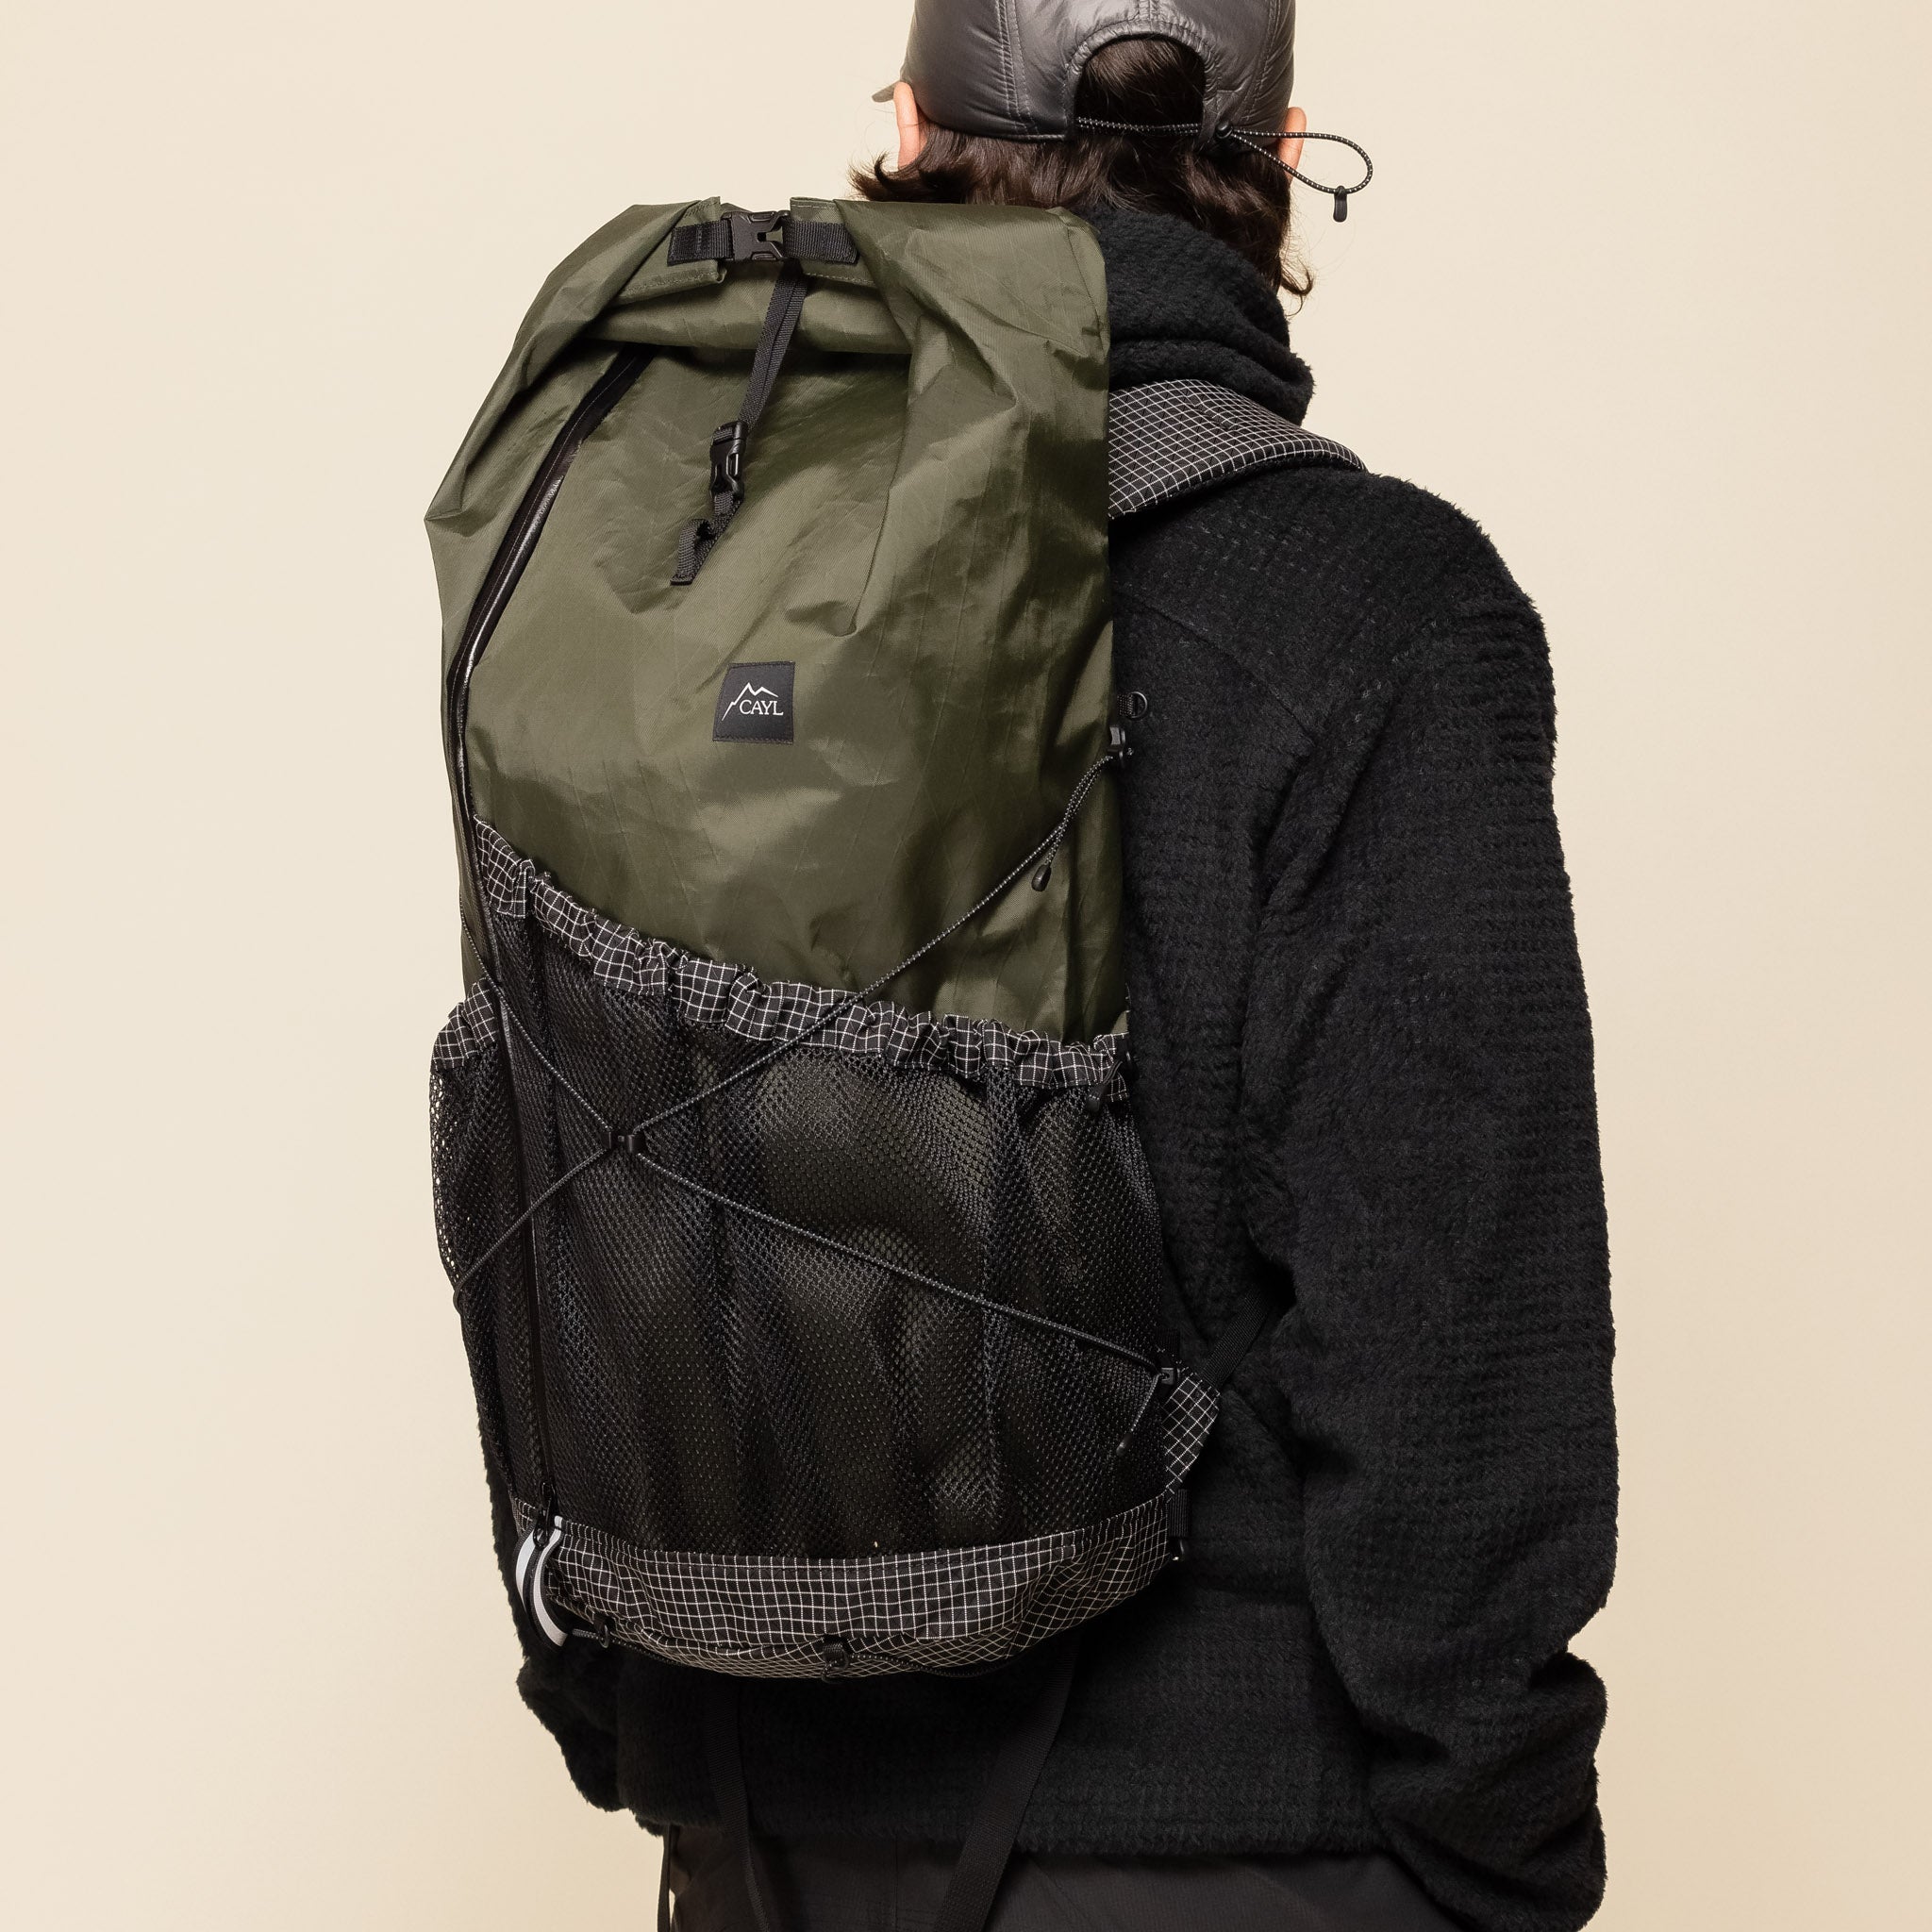 CAYL "Climb As You Love" - Mari Roll Top Backpack - Olive X-Pac "cayl stockists" "cayl backpack" "climb as you love"